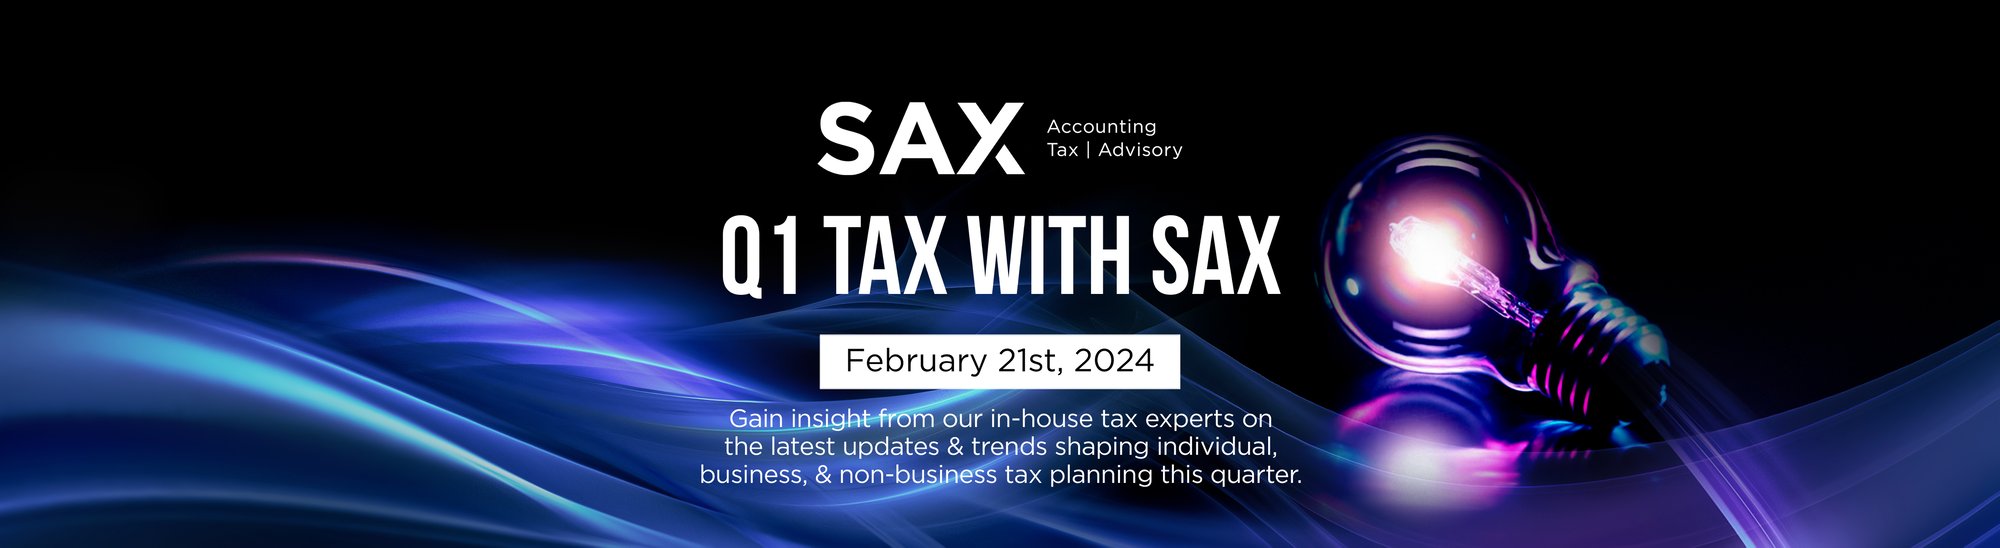 SAX-Tax-With-Sax-Q1-2024-Banner-Mobile (1)